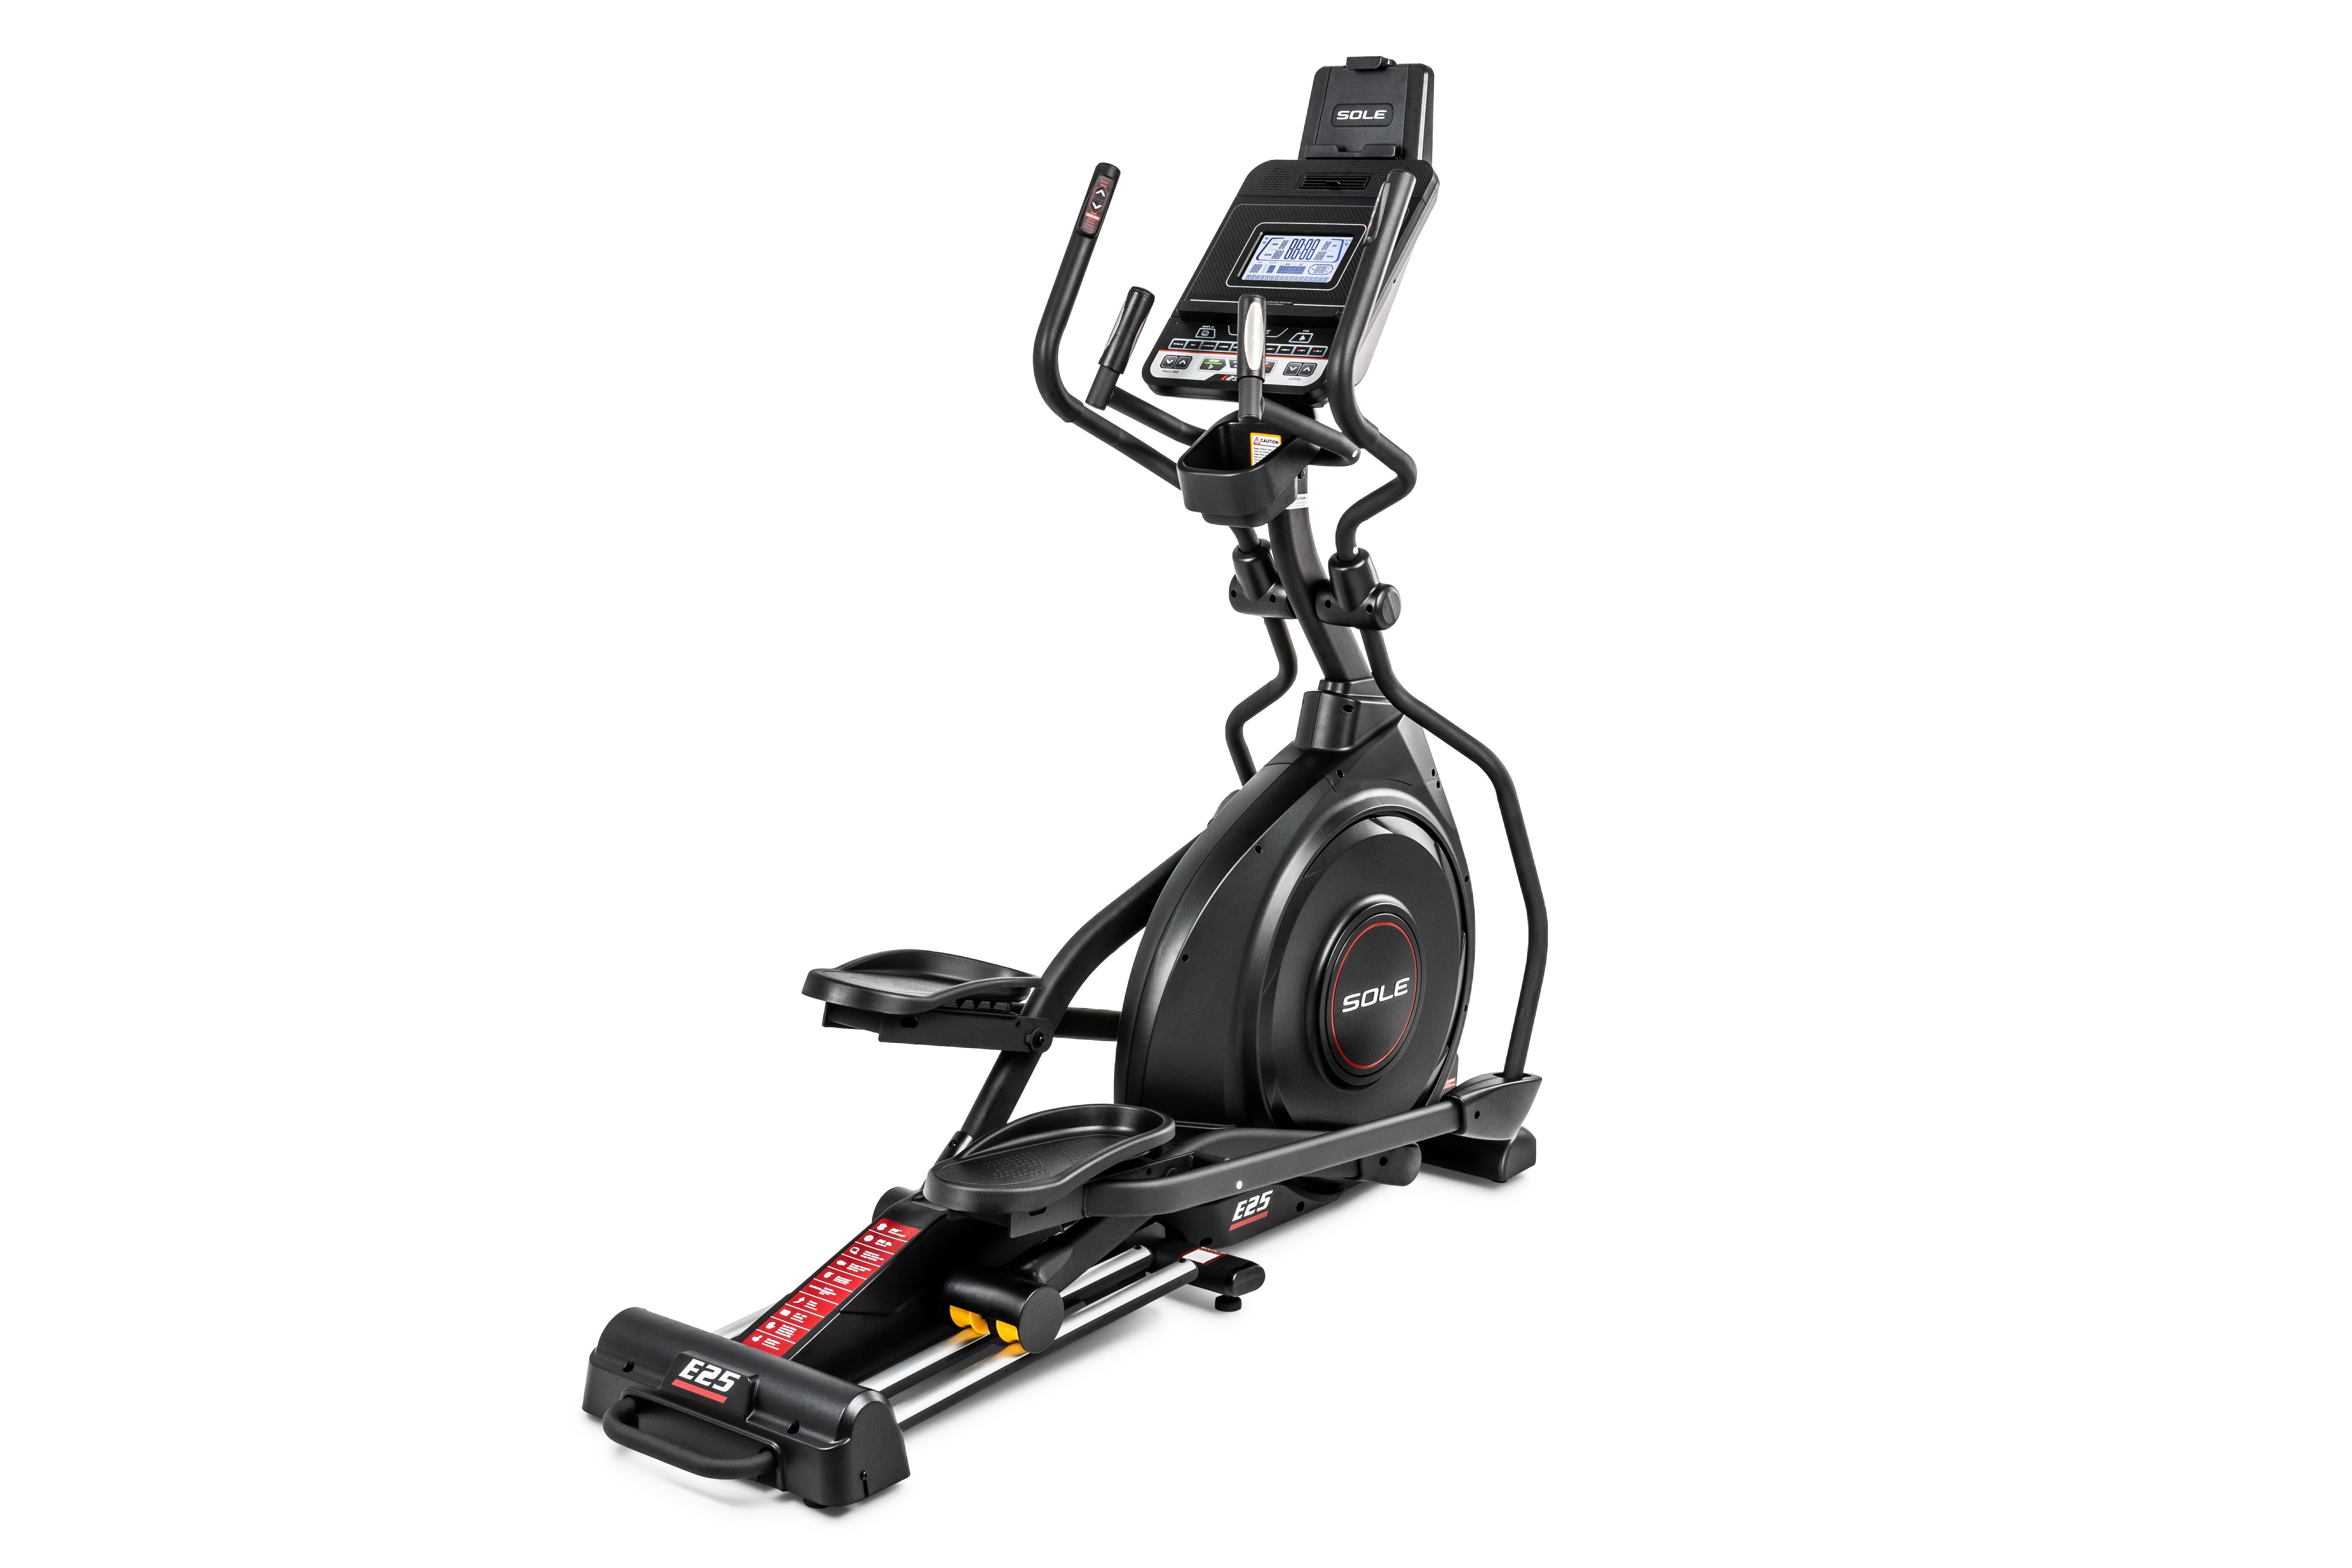 Sole E25 elliptical machine with a digital display, ergonomic handles, and adjustable foot pedals, set against a white background.